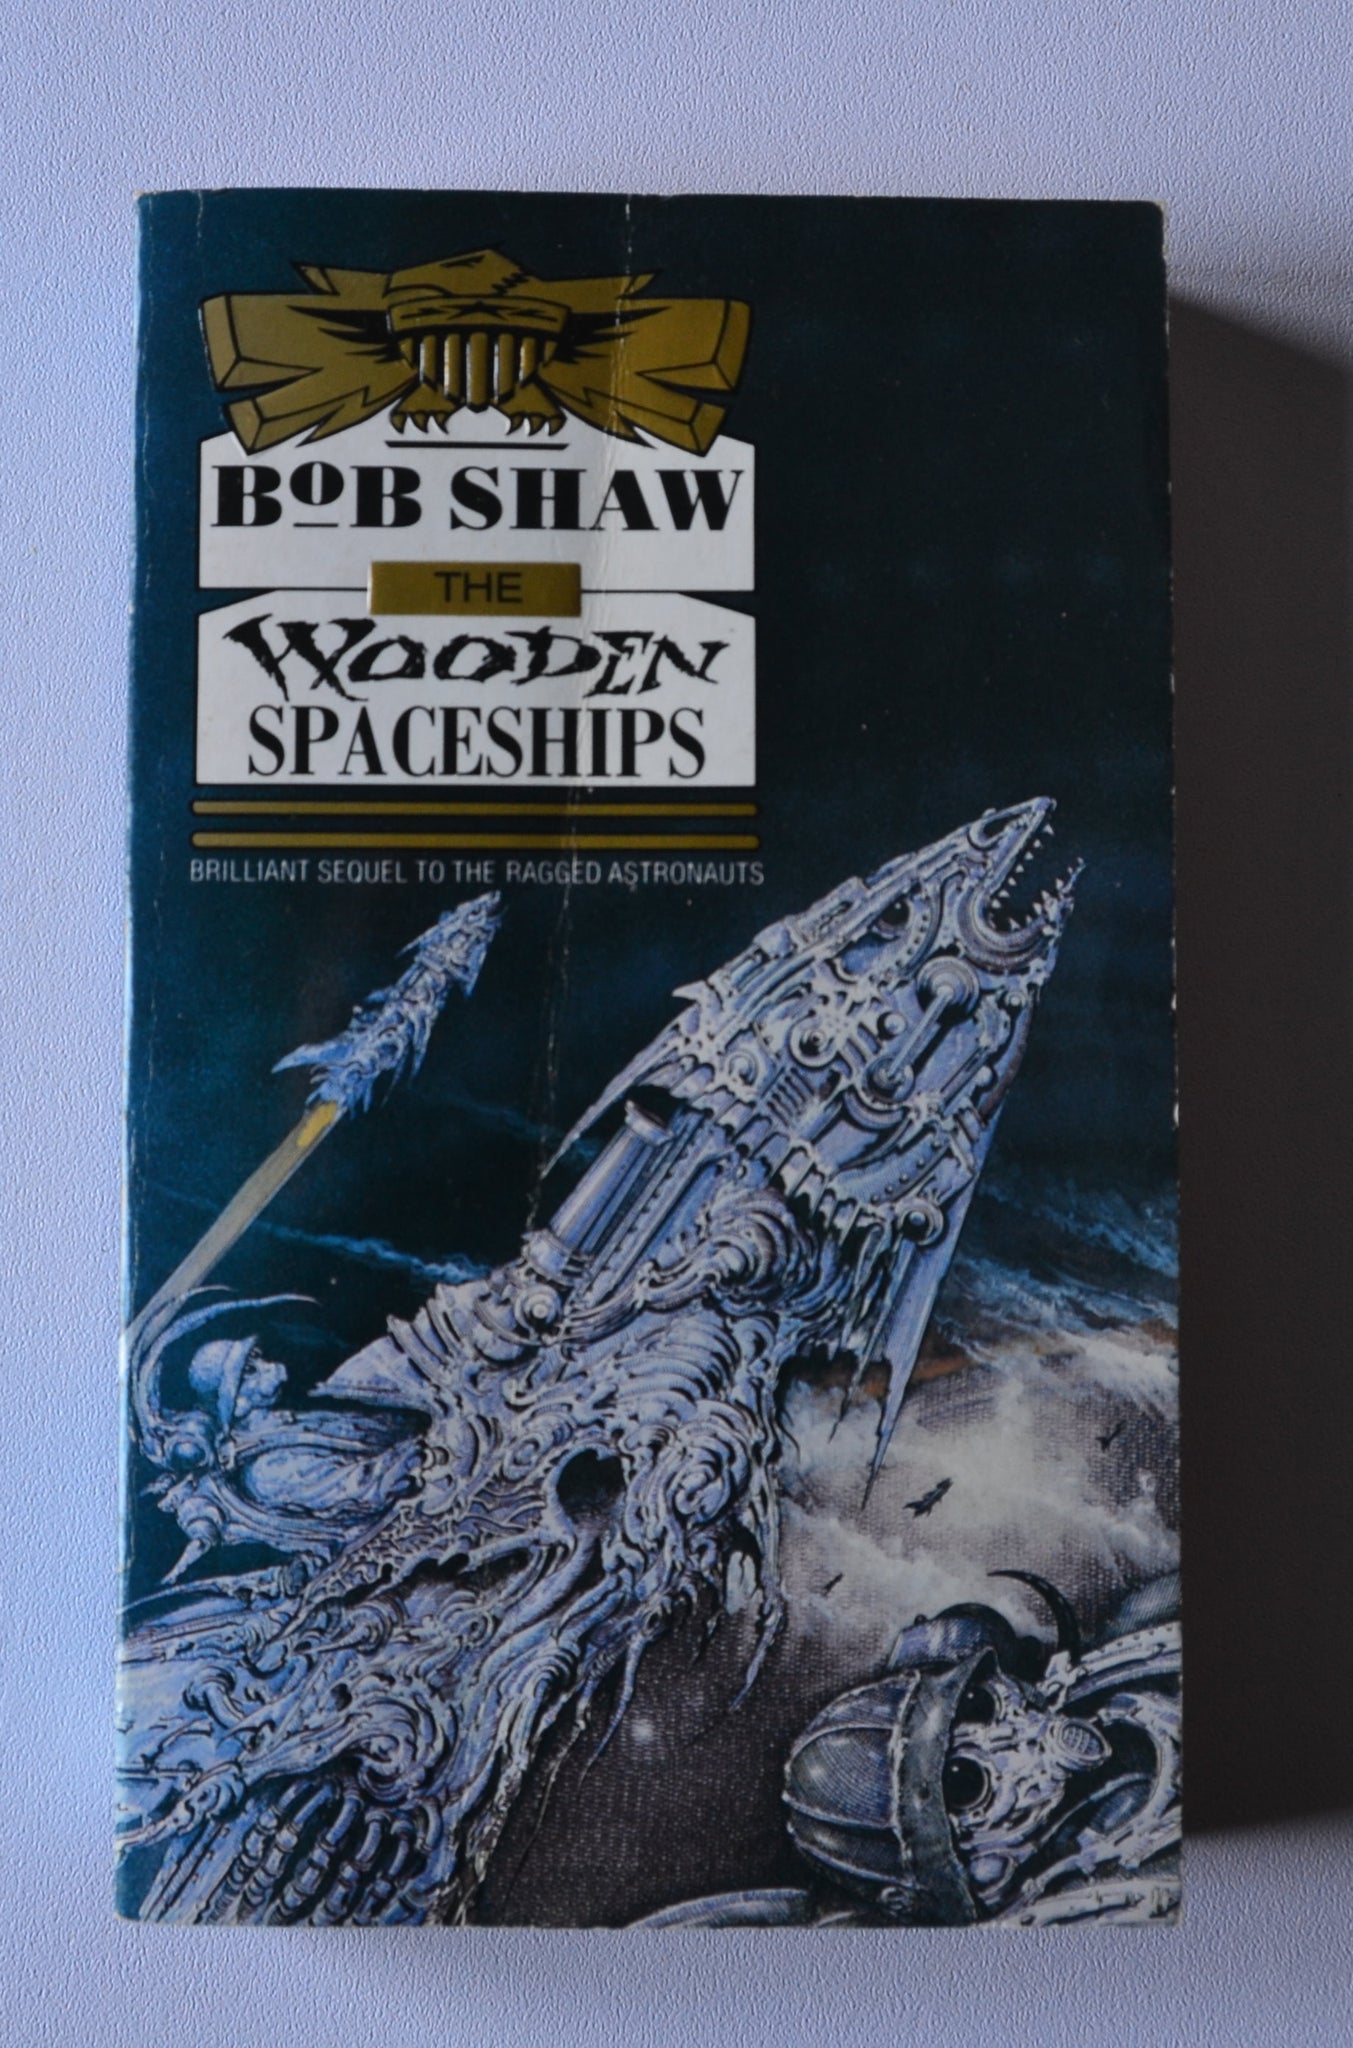 The Wooden Spaceships - Land and Overland Series book 2